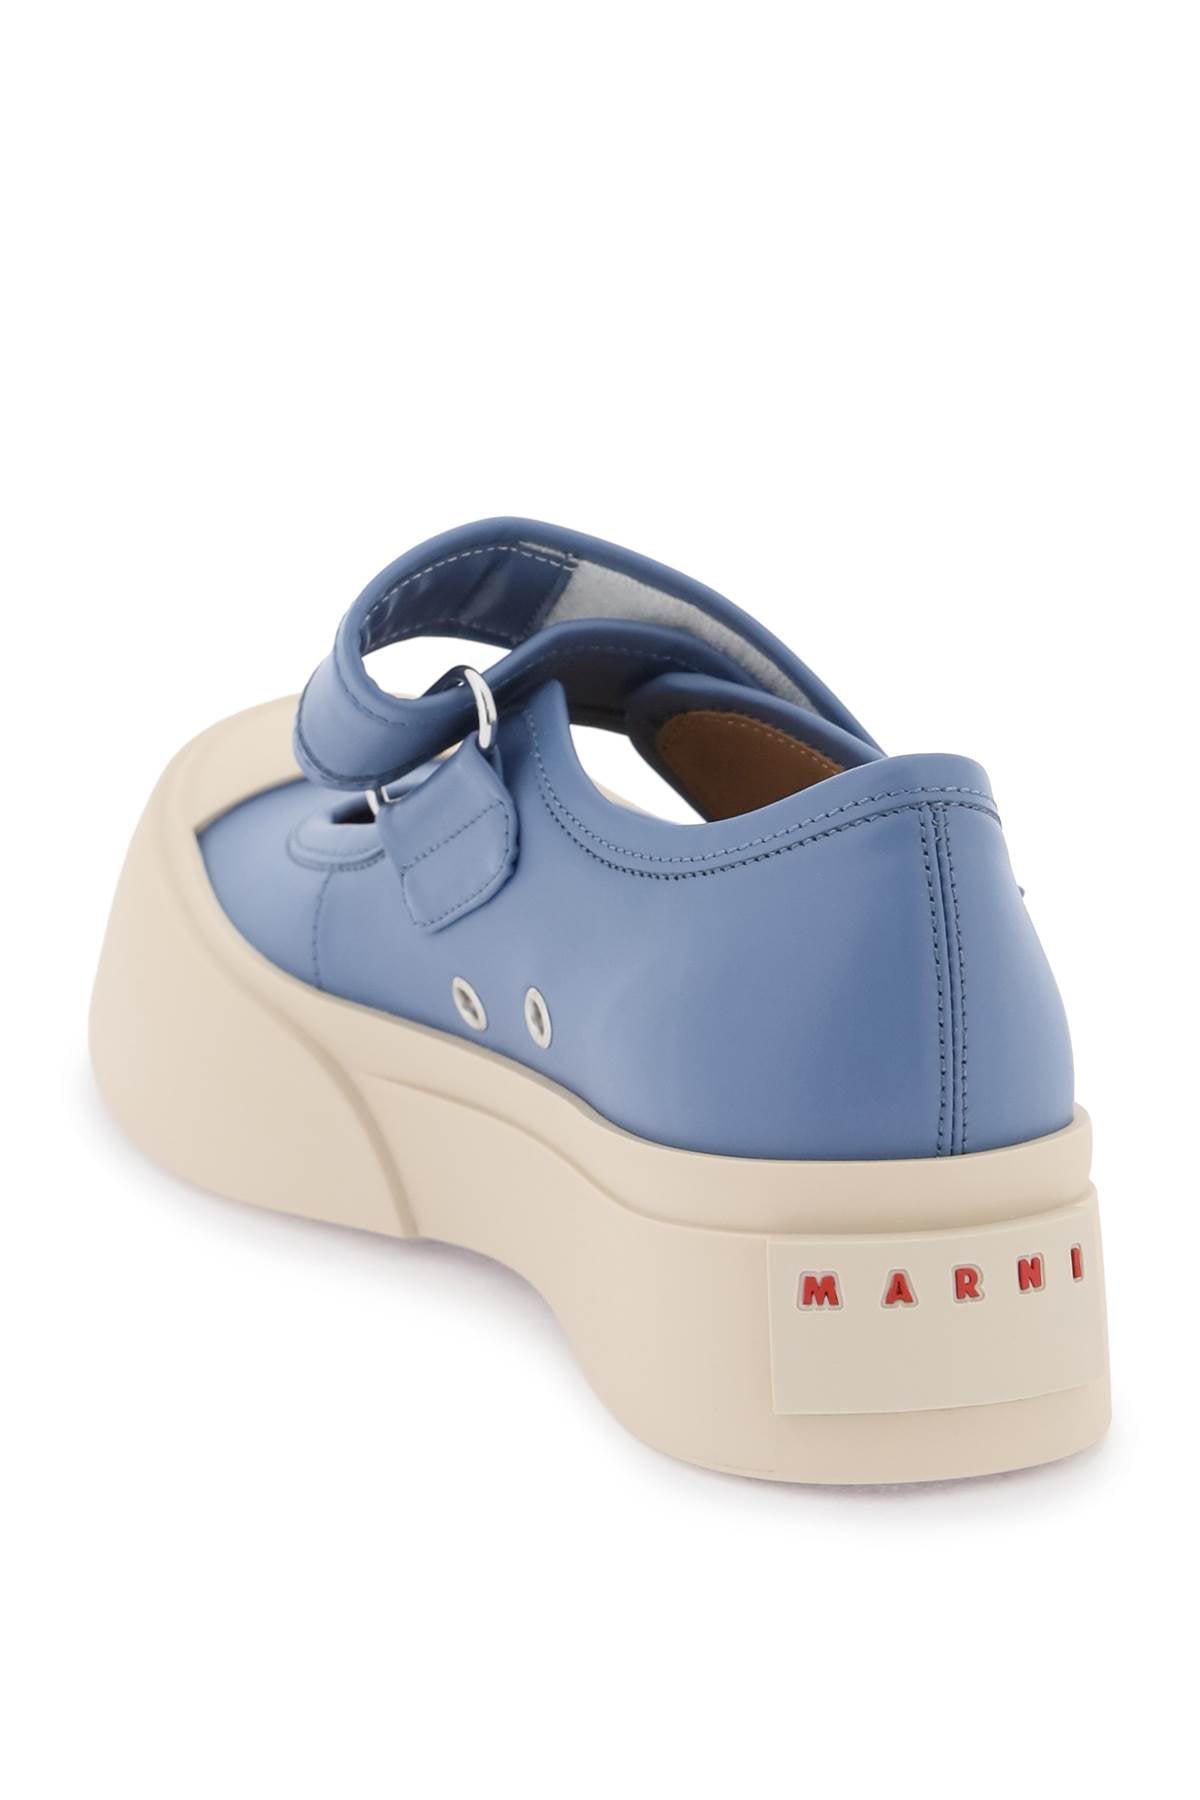 Marni pablo mary jane nappa leather sneakers-women > shoes > sneakers-Marni-39-Mixed colours-Urbanheer